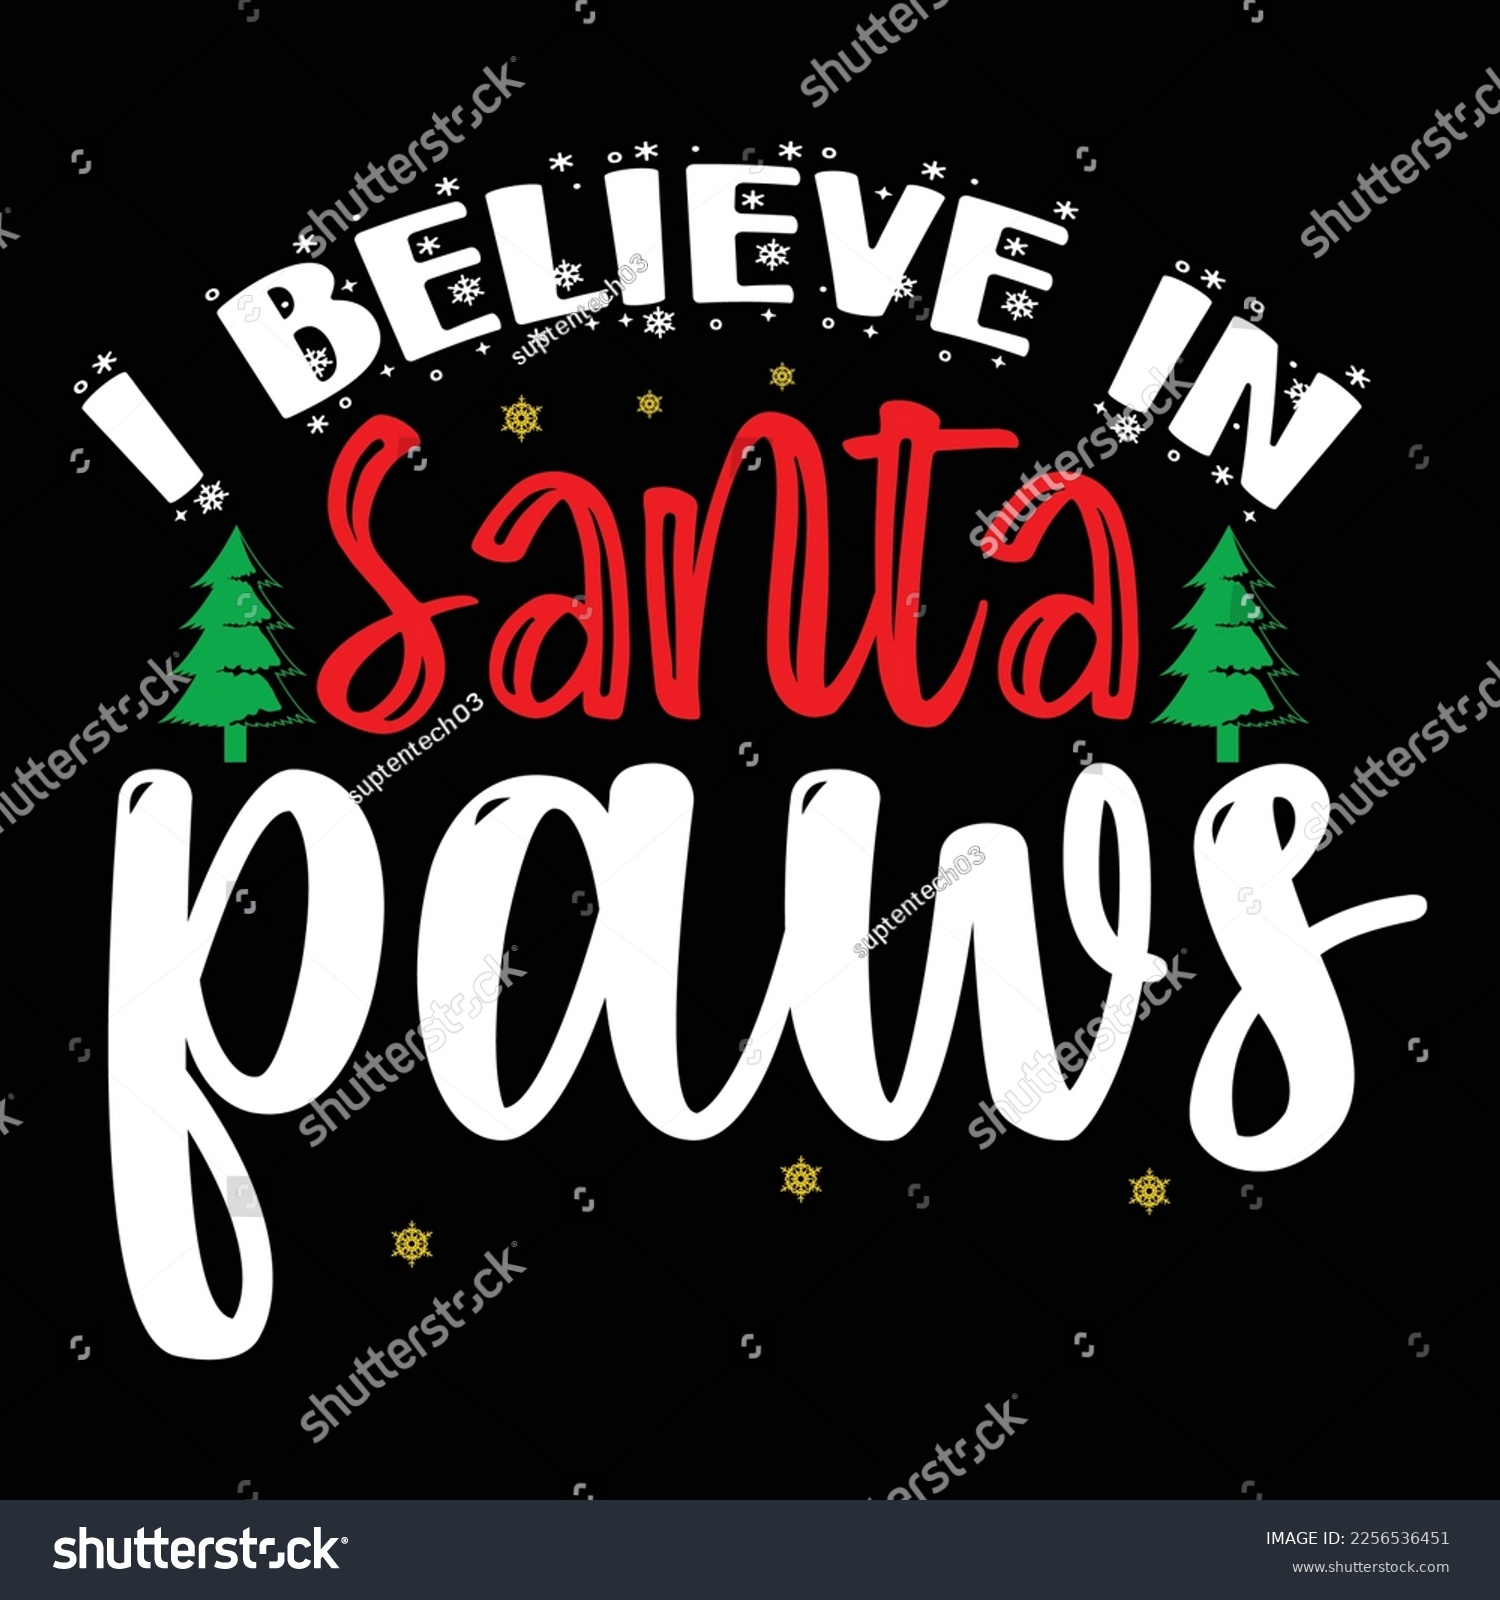 SVG of I Believe In Santa Paws, Merry Christmas shirts Print Template, Xmas Ugly Snow Santa Clouse New Year Holiday Candy Santa Hat vector illustration for Christmas hand lettered svg